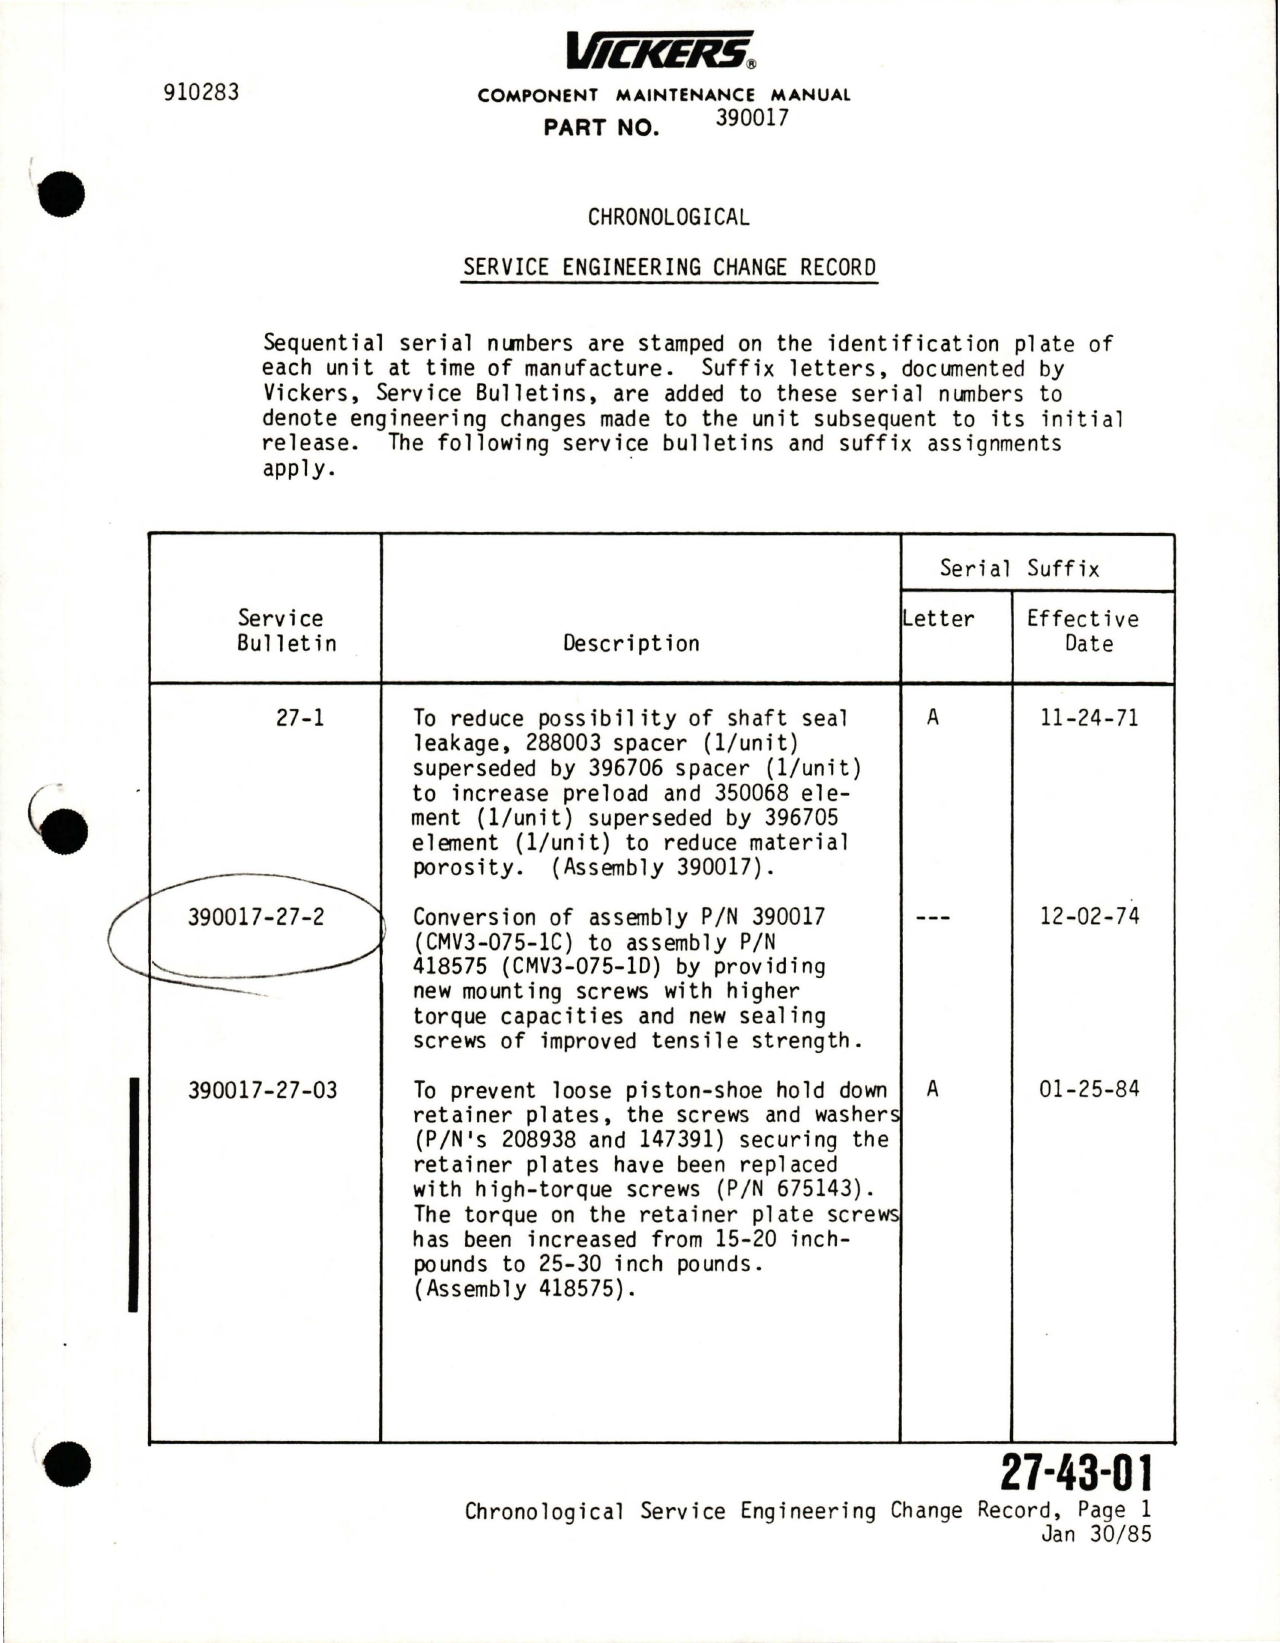 Sample page 9 from AirCorps Library document: Maintenance Manual with Illustrated Parts Breakdown for Hydraulic Motor Assembly - Model CMV3-075-1C and CMV3-075-1D